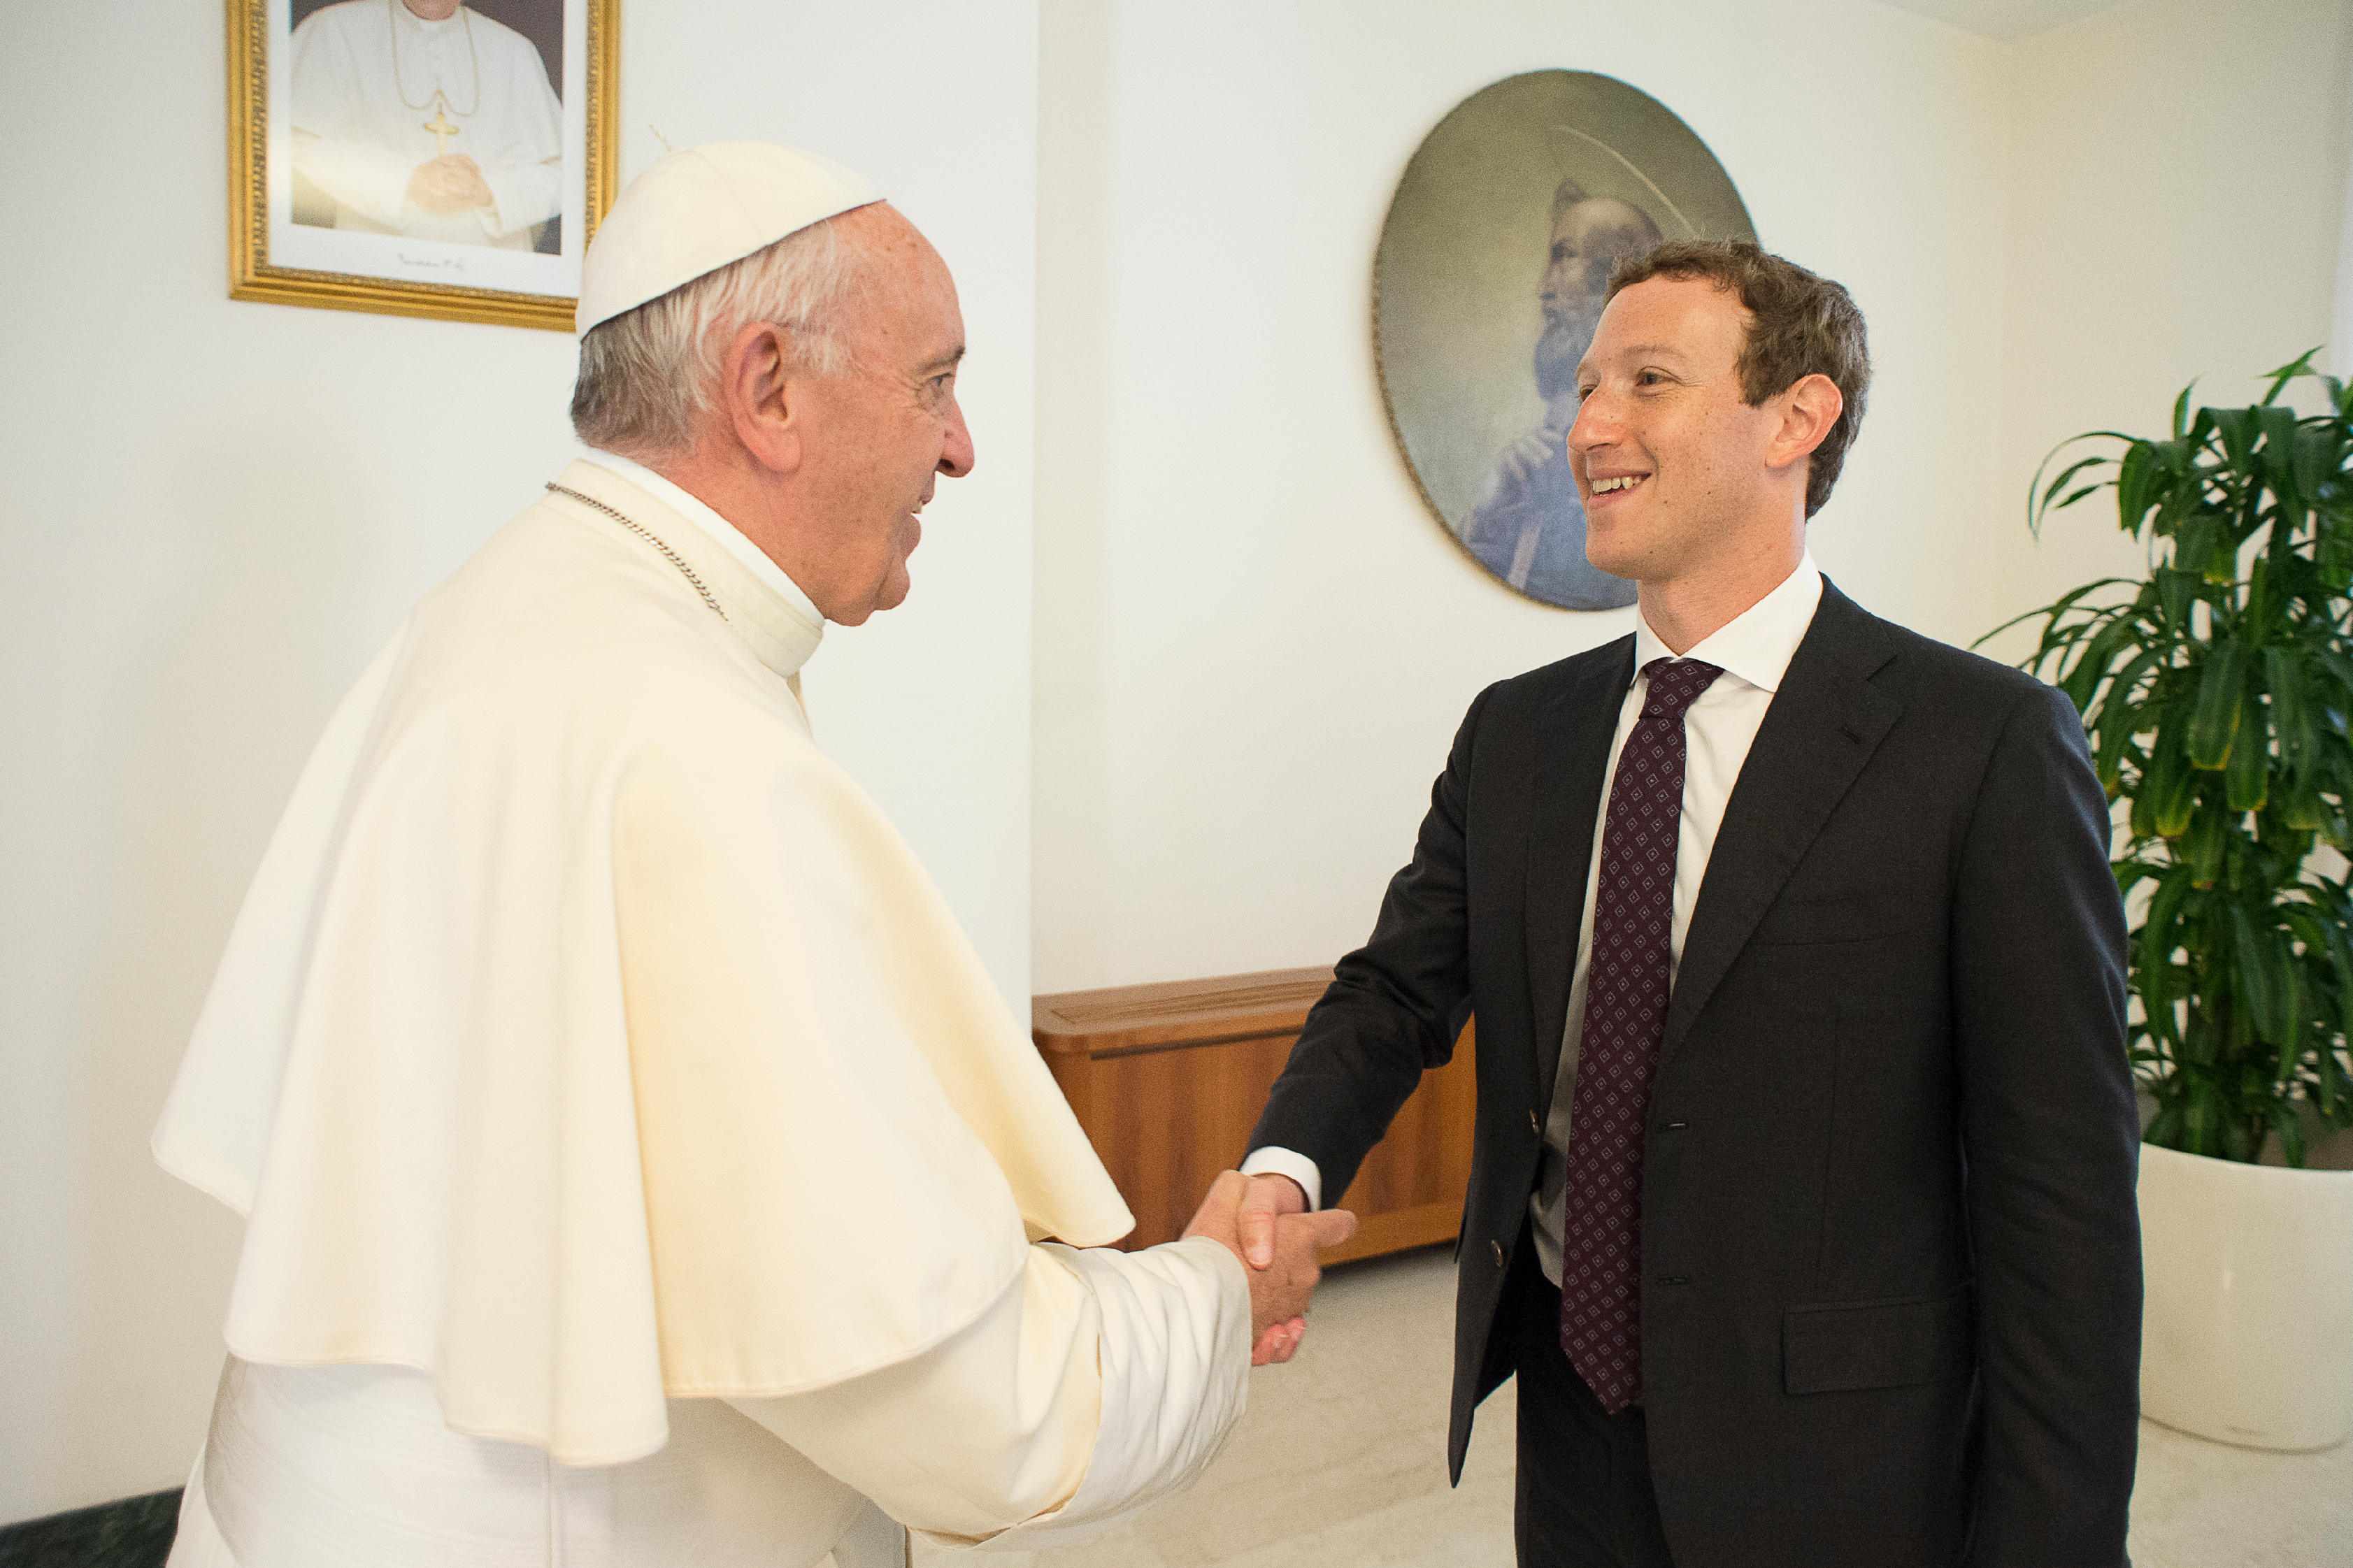 Pope Francis meets Mark Zuckerberg, CEO of Facebook, during a private audience at the Vatican Aug. 29. (CNS photo/L'Osservatore Romano, handout)